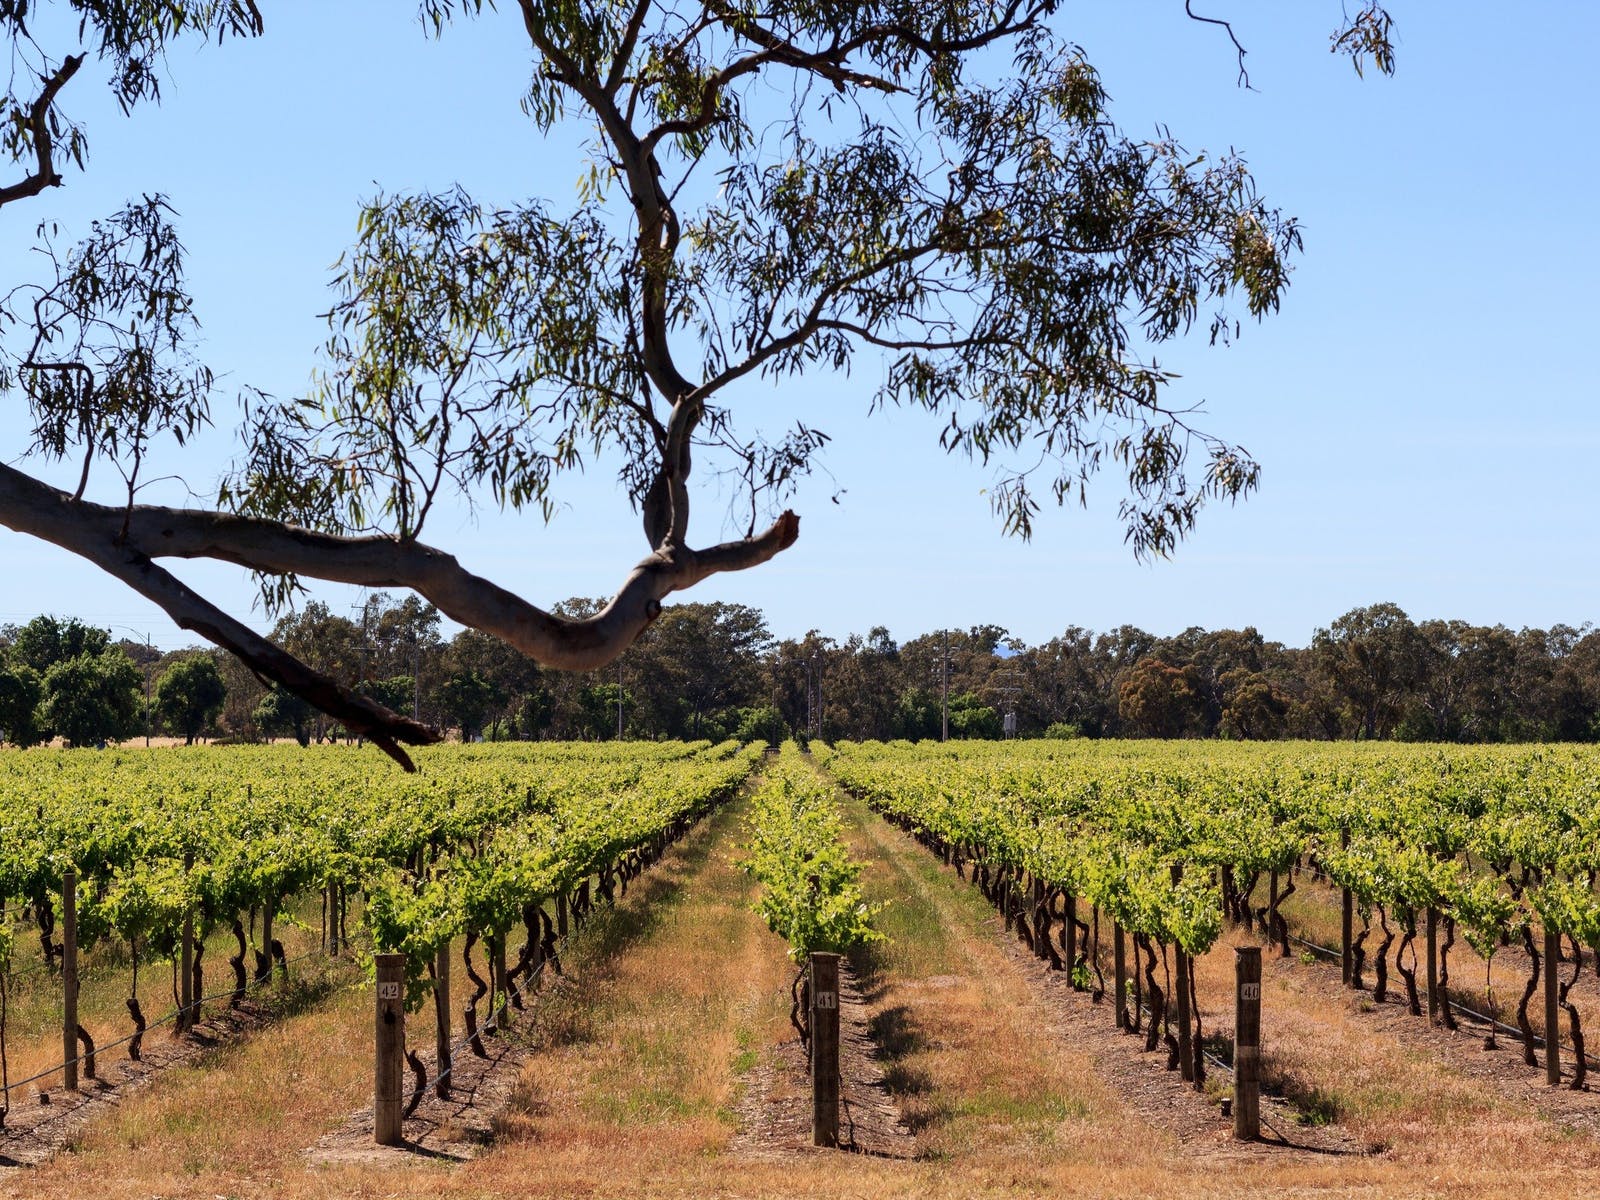 Over 250 wineries and 100 cellar doors dot the Shiraz Central region